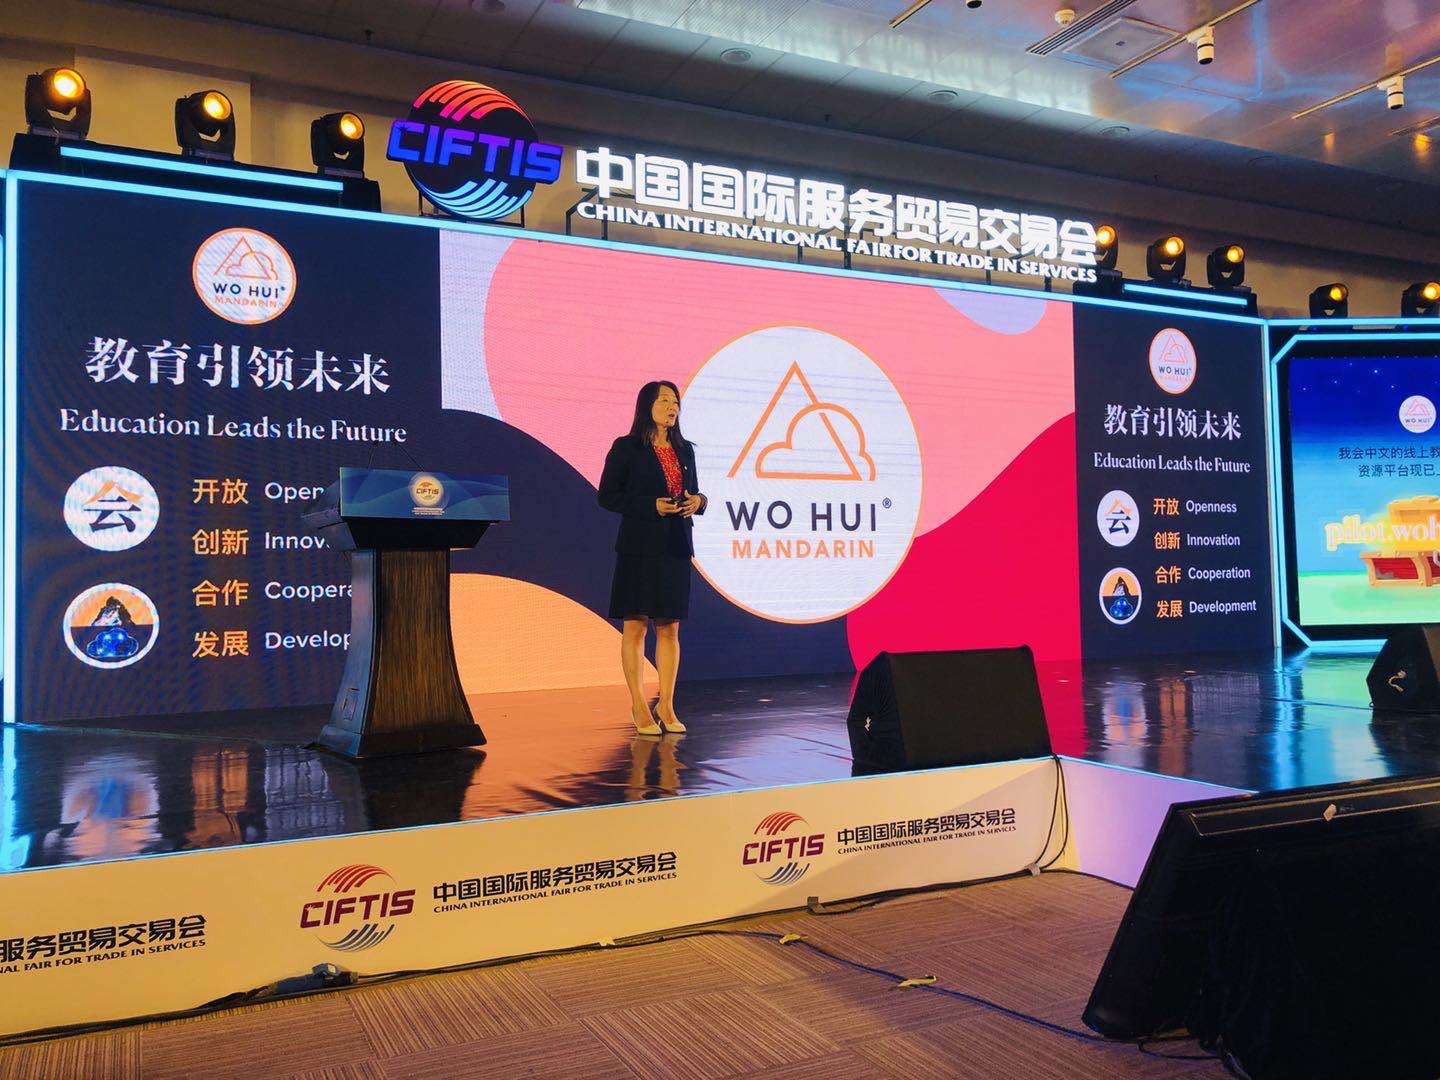 Wo Hui Mandarin launches to the public on the CIFTIS stage